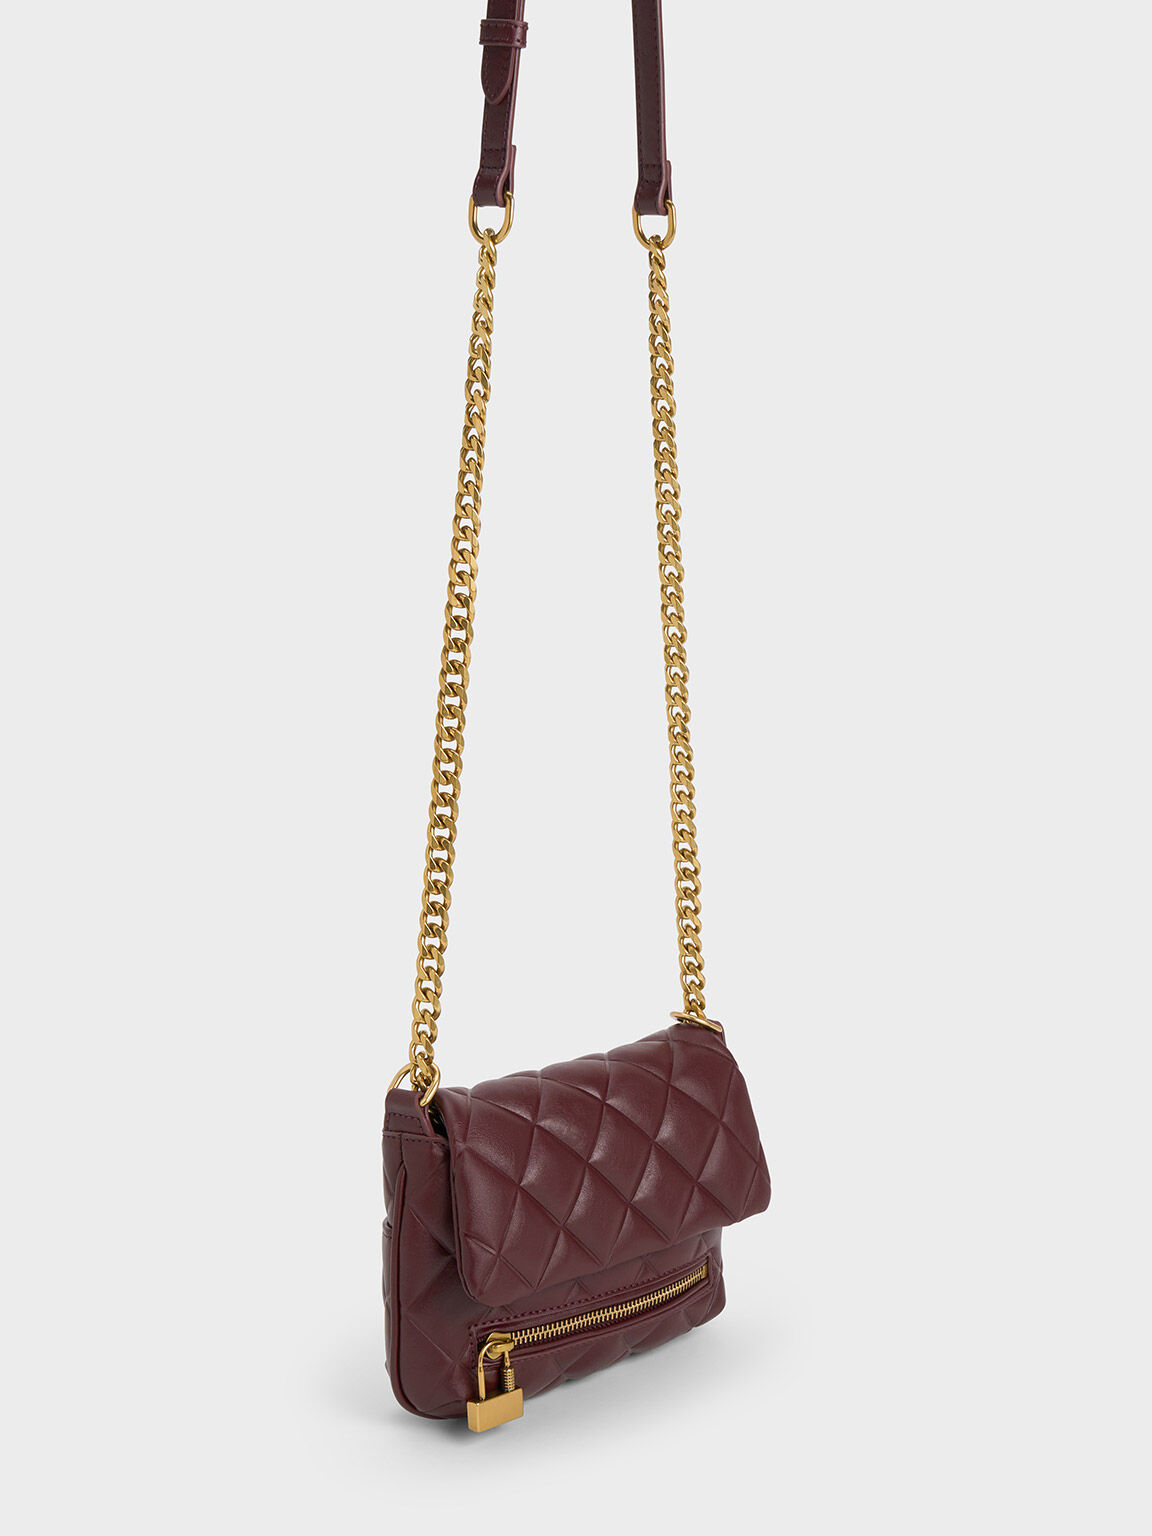 CottonSide - Charles & Keith bags Price Rs.2500 For